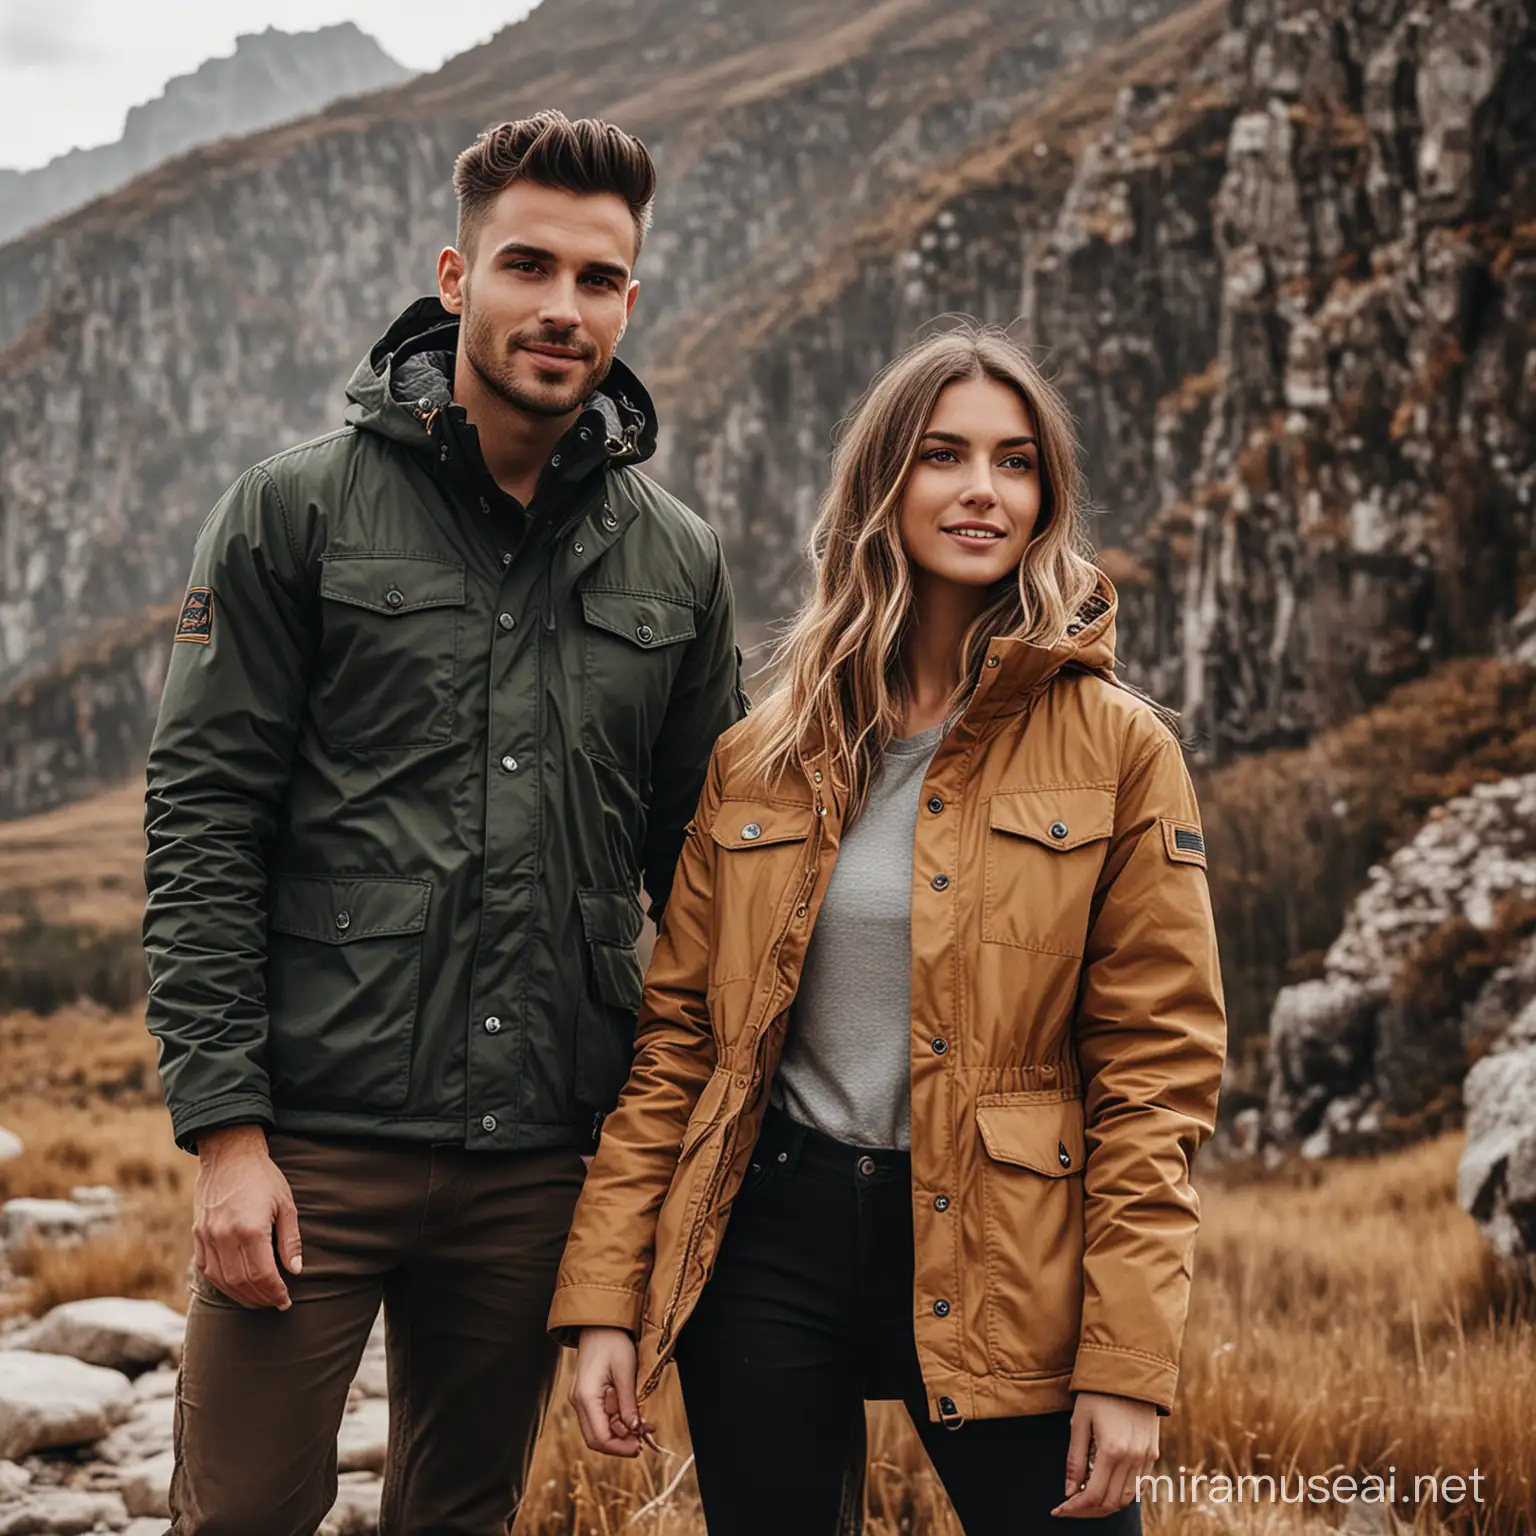 Outdoor Adventure Stylish Mens and Womens Jackets Pose for Exploration